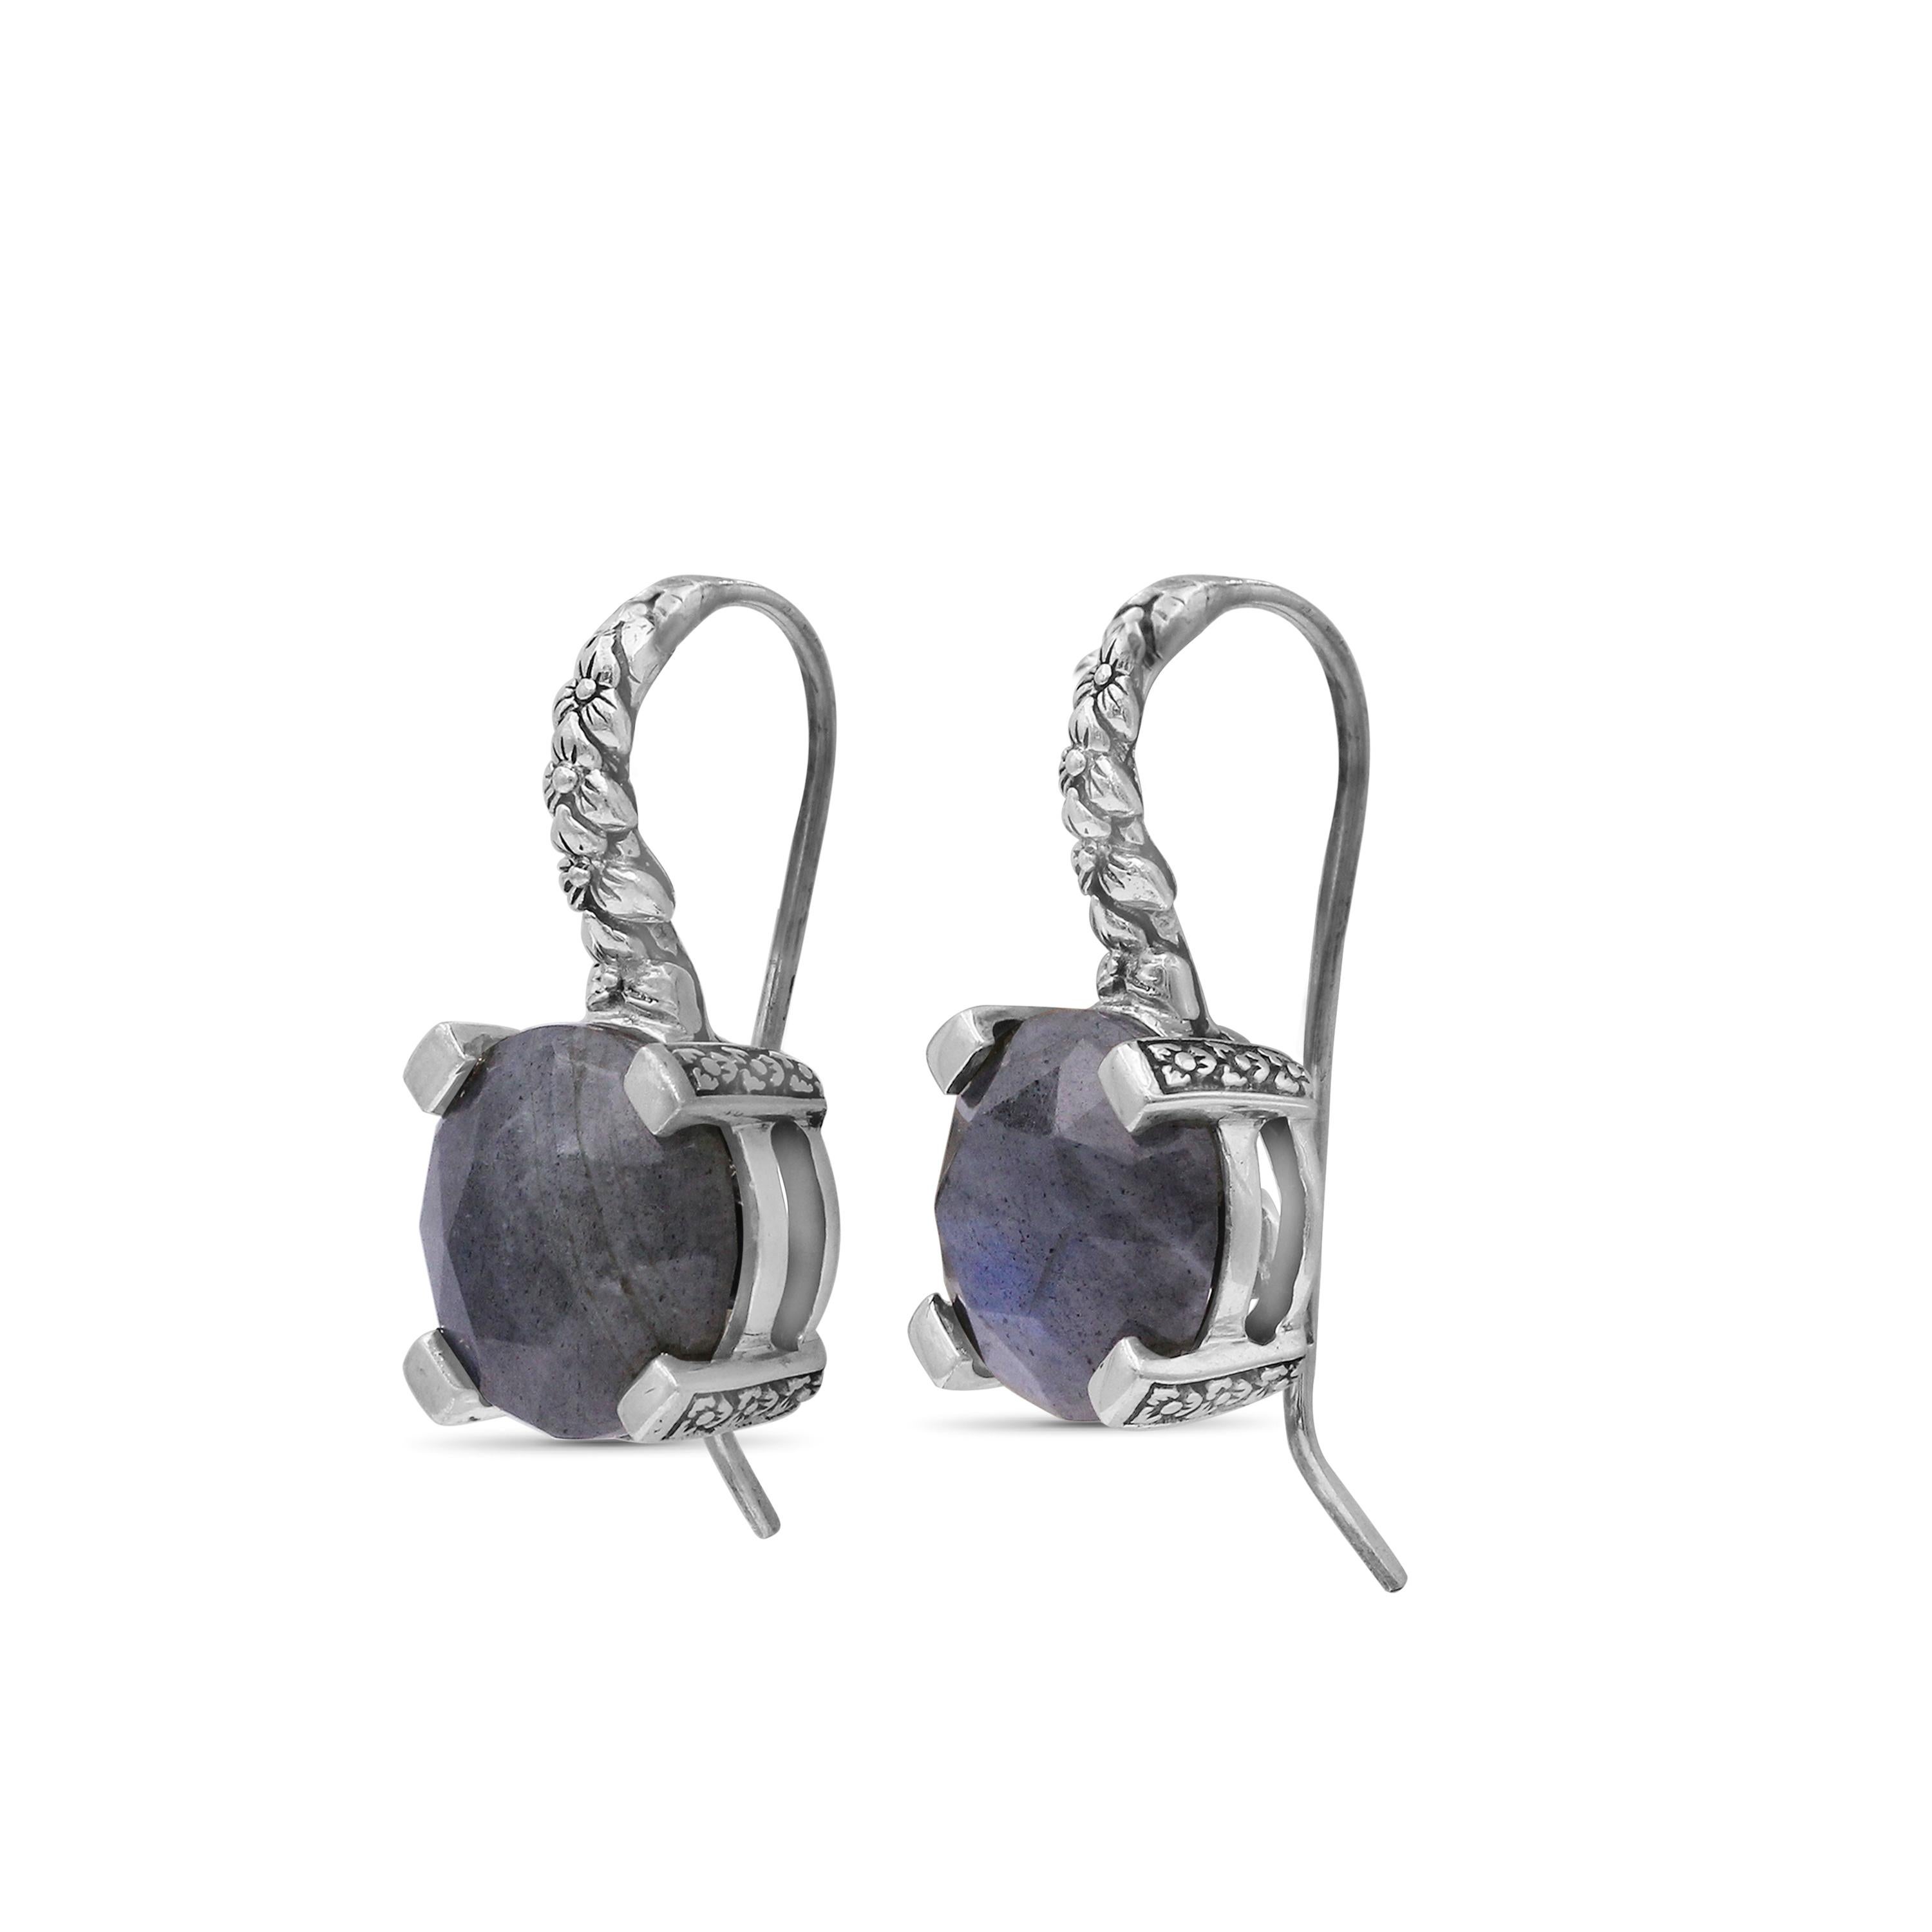 12mm Round Faceted Mother of Pearl and Hematite Hook Earring with Engraved Sterling Silver

Stephen’s heart and passion go into each Dweck design, as the placement of each stone and its connection to nature has meaning. While bold and opulent, his